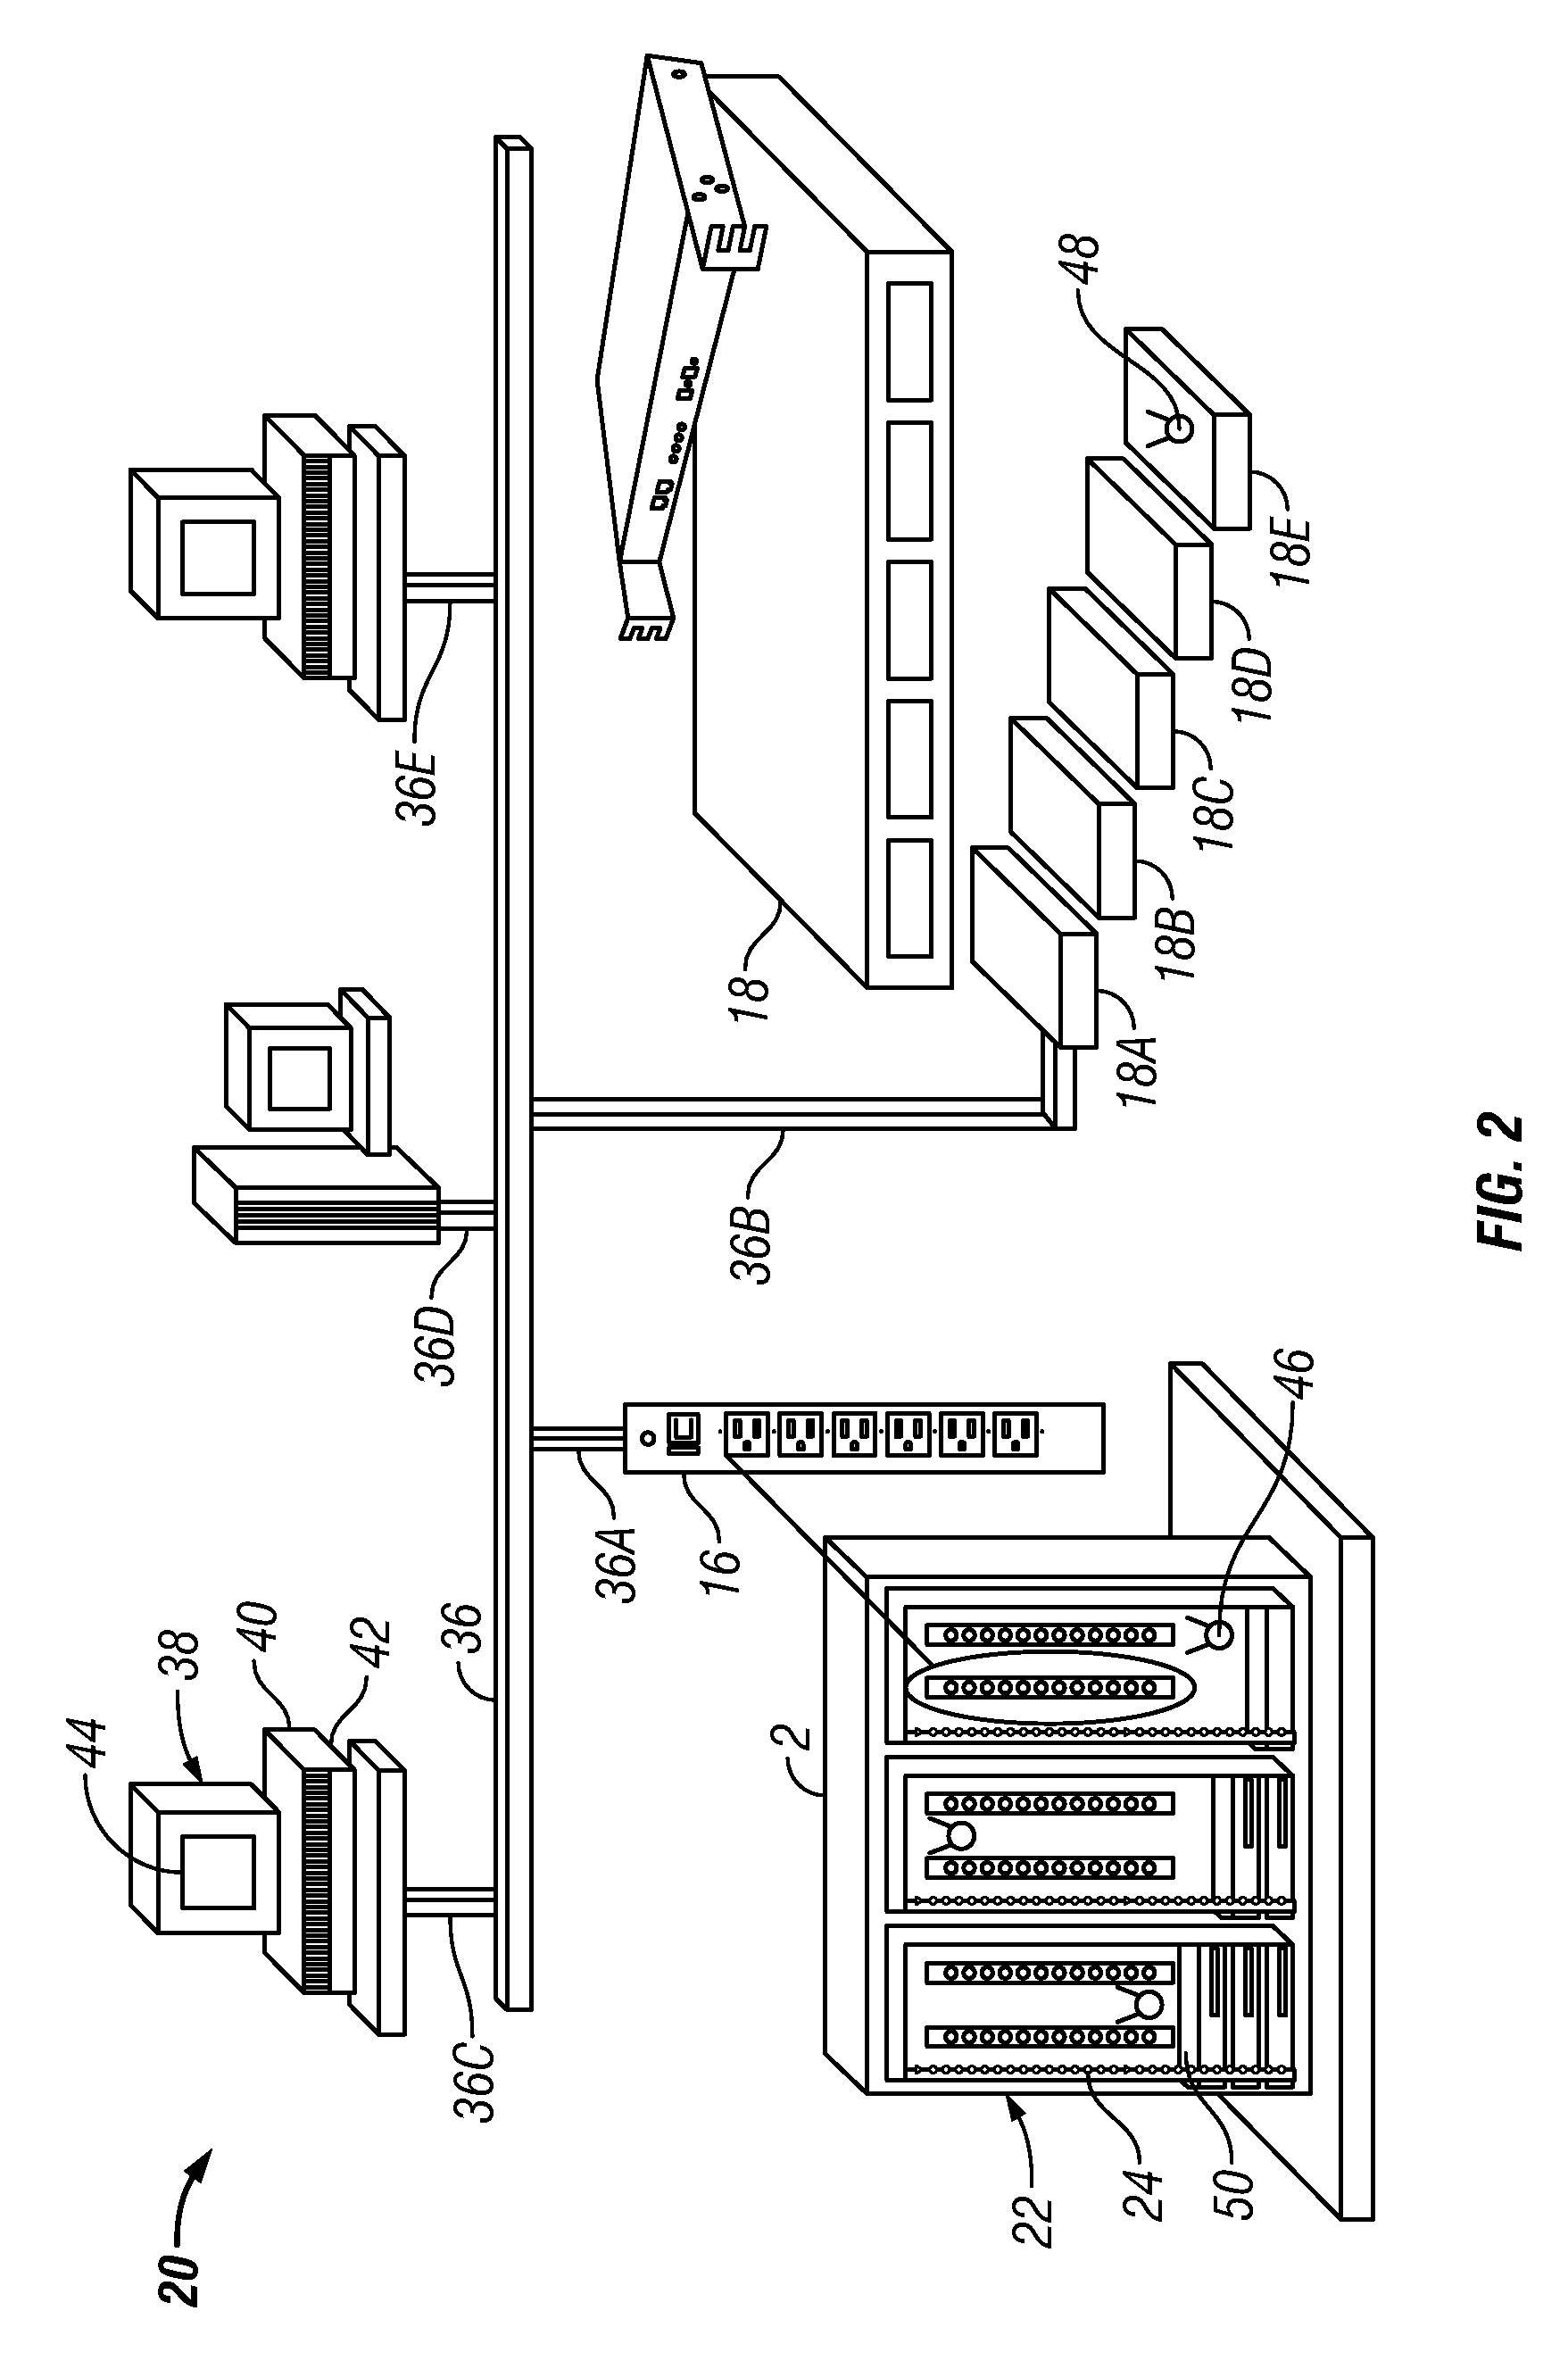 Intelligent track system for mounting electronic equipment